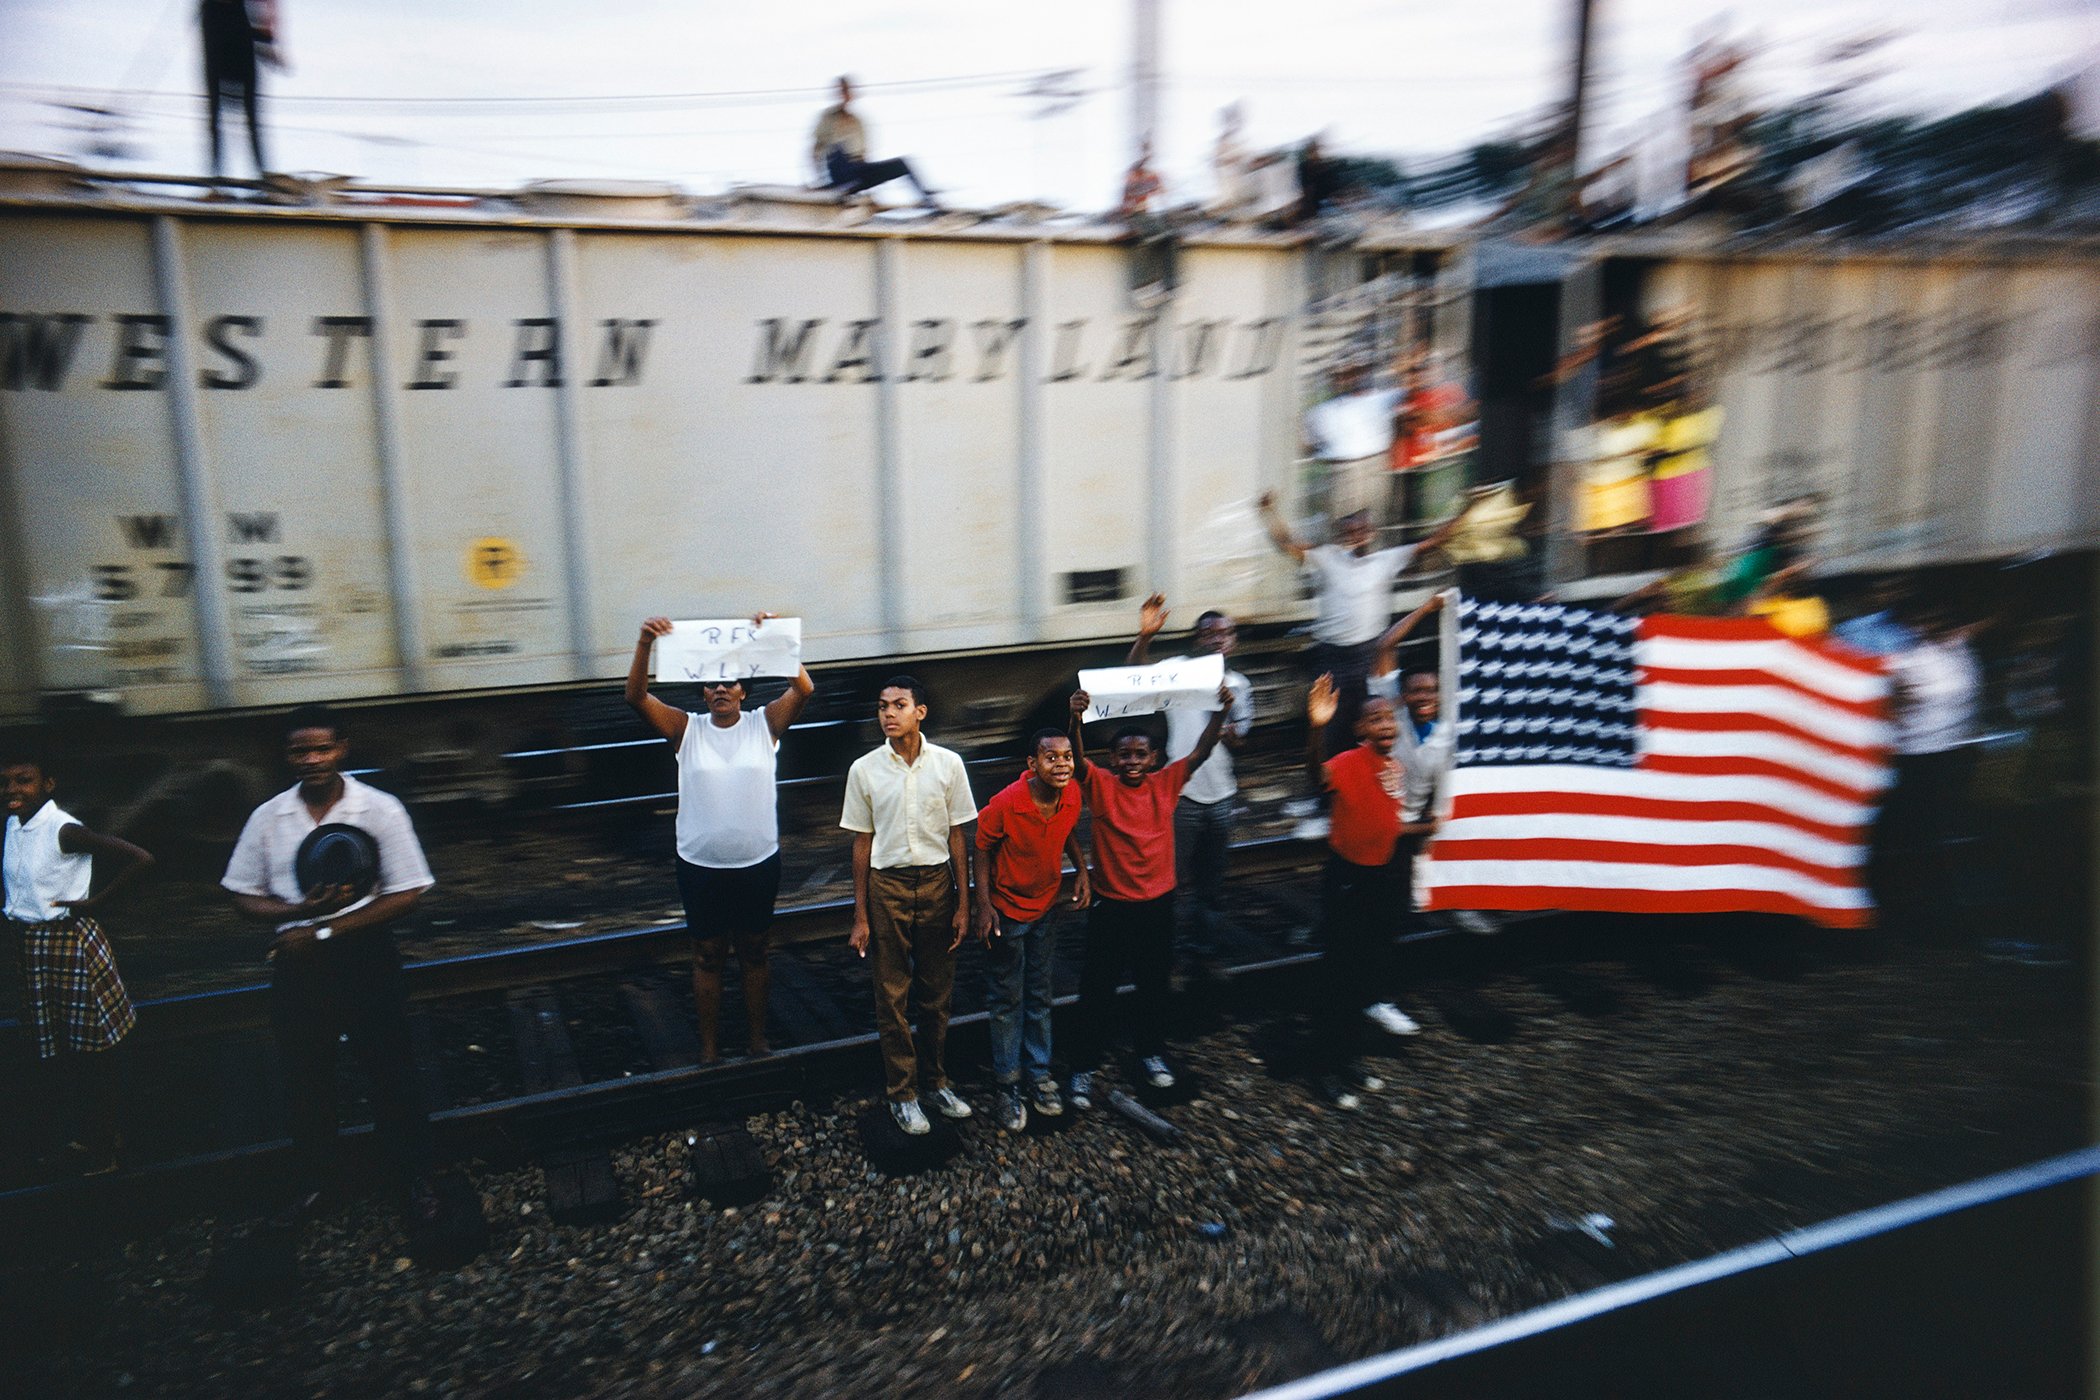 The truth of grief: Paul Fusco, Robert F. Kennedy and "The Train" at SFMOMA